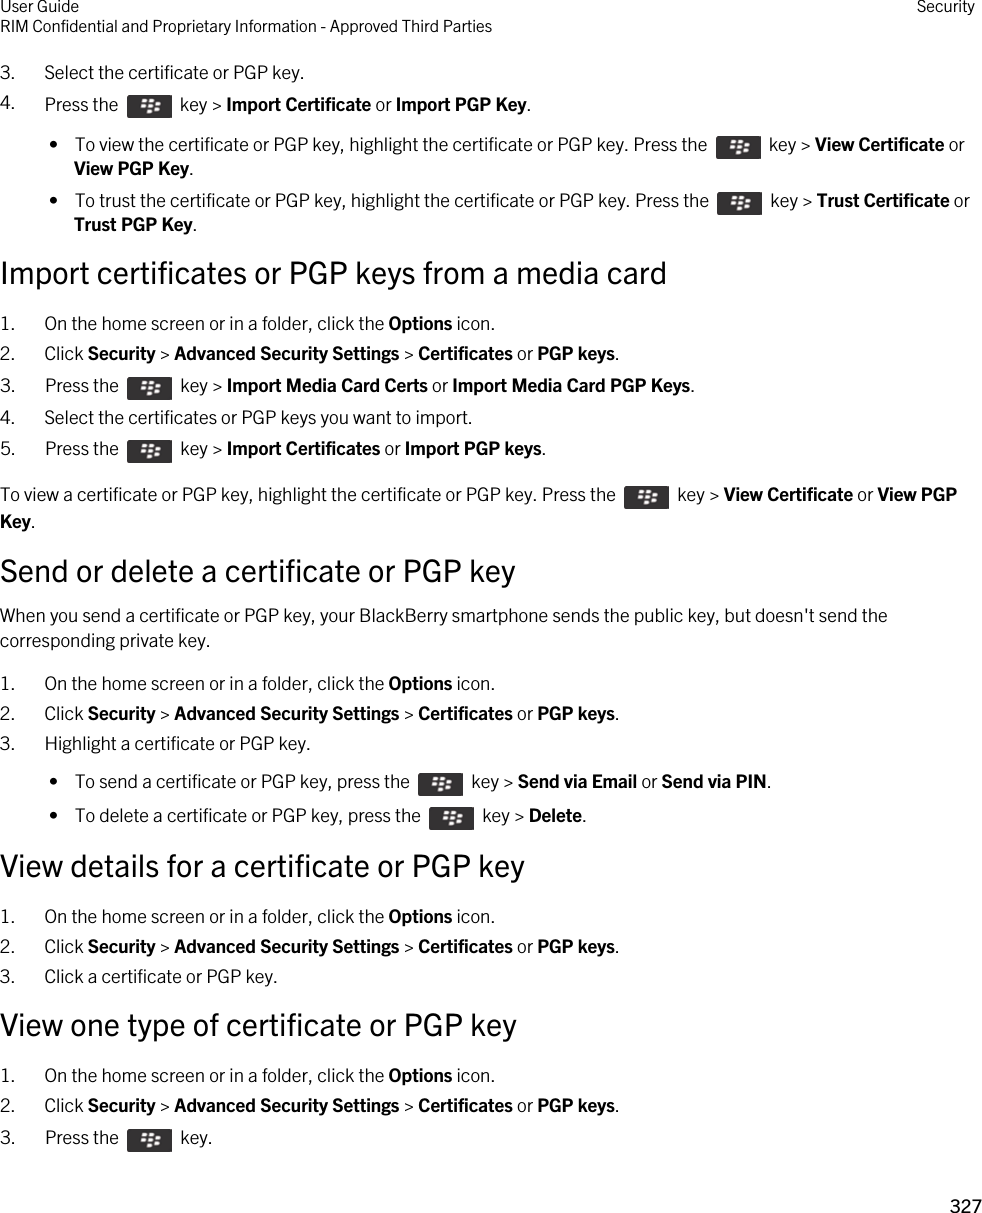 3. Select the certificate or PGP key.4. Press the    key &gt; Import Certificate or Import PGP Key.  •  To view the certificate or PGP key, highlight the certificate or PGP key. Press the    key &gt; View Certificate or View PGP Key. •  To trust the certificate or PGP key, highlight the certificate or PGP key. Press the    key &gt; Trust Certificate or Trust PGP Key.Import certificates or PGP keys from a media card1. On the home screen or in a folder, click the Options icon.2. Click Security &gt; Advanced Security Settings &gt; Certificates or PGP keys.3.  Press the    key &gt; Import Media Card Certs or Import Media Card PGP Keys.4. Select the certificates or PGP keys you want to import.5.  Press the    key &gt; Import Certificates or Import PGP keys.To view a certificate or PGP key, highlight the certificate or PGP key. Press the    key &gt; View Certificate or View PGP Key.Send or delete a certificate or PGP keyWhen you send a certificate or PGP key, your BlackBerry smartphone sends the public key, but doesn&apos;t send the corresponding private key.1. On the home screen or in a folder, click the Options icon.2. Click Security &gt; Advanced Security Settings &gt; Certificates or PGP keys.3. Highlight a certificate or PGP key. •  To send a certificate or PGP key, press the    key &gt; Send via Email or Send via PIN. •  To delete a certificate or PGP key, press the    key &gt; Delete.View details for a certificate or PGP key1. On the home screen or in a folder, click the Options icon.2. Click Security &gt; Advanced Security Settings &gt; Certificates or PGP keys.3. Click a certificate or PGP key.View one type of certificate or PGP key1. On the home screen or in a folder, click the Options icon.2. Click Security &gt; Advanced Security Settings &gt; Certificates or PGP keys.3.  Press the    key. User GuideRIM Confidential and Proprietary Information - Approved Third Parties Security327 